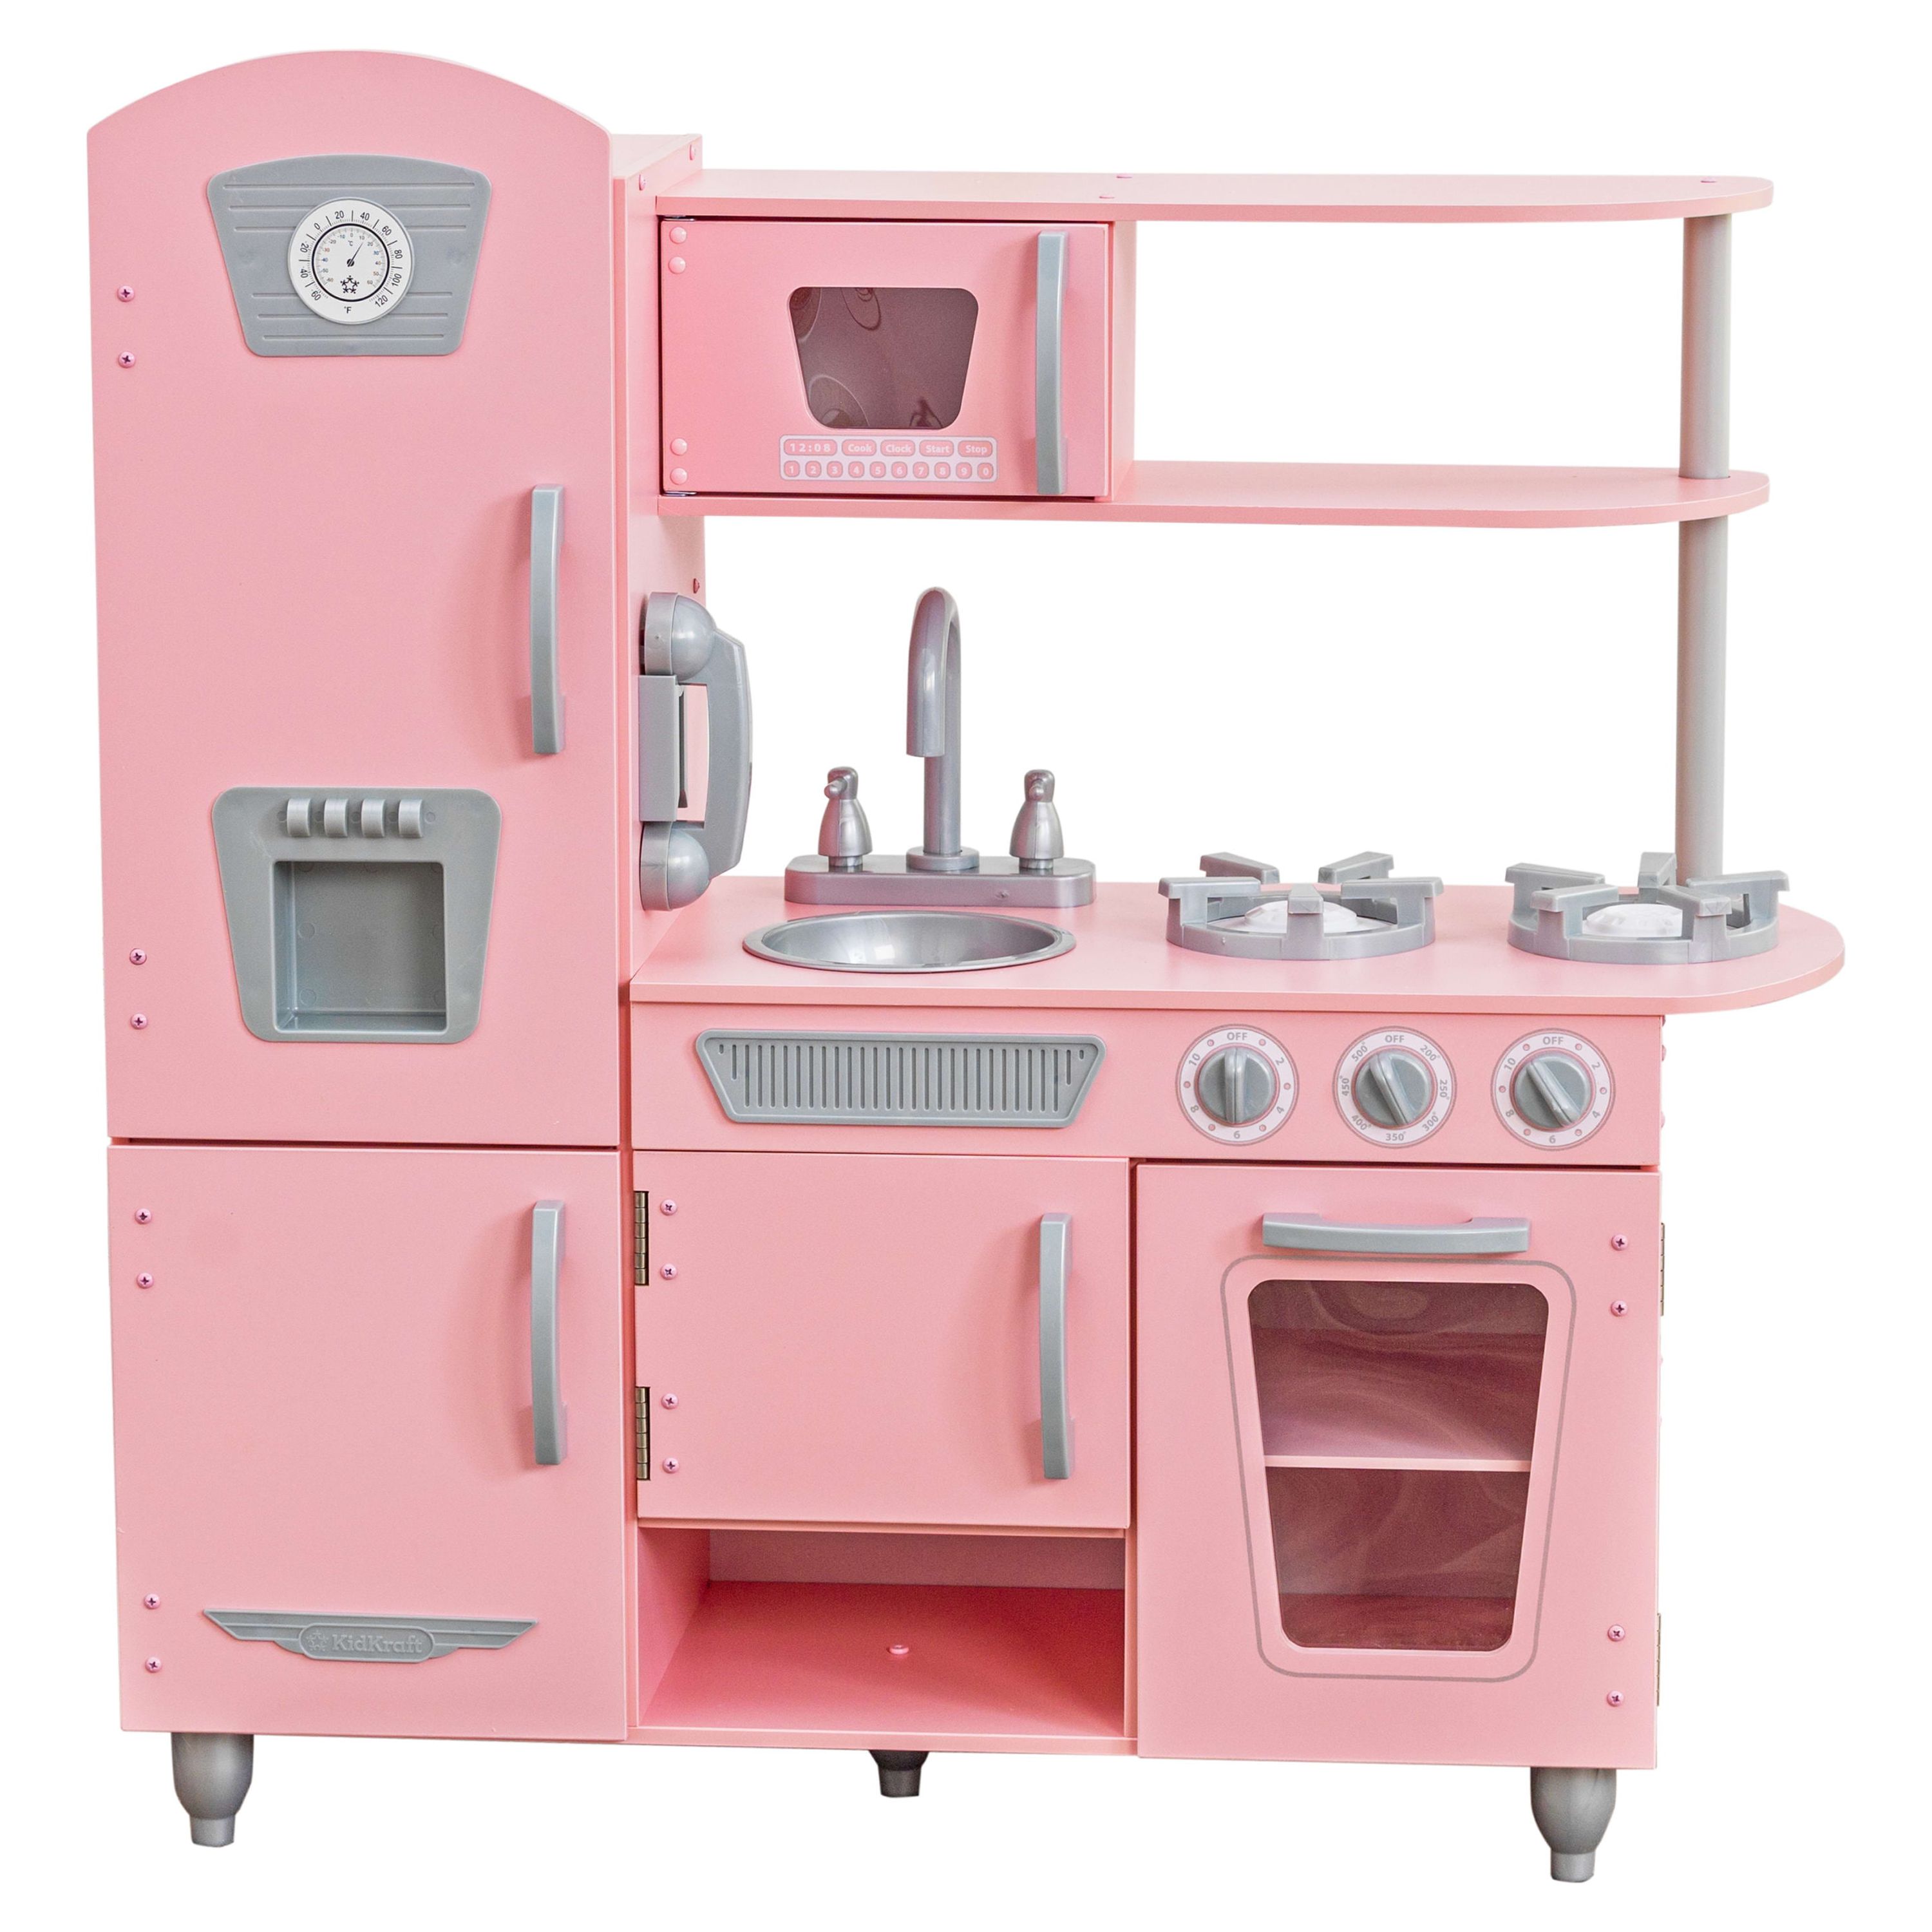 KidKraft Pink Vintage Wooden Play Kitchen with Pretend Ice Maker and Play Phone - image 1 of 11